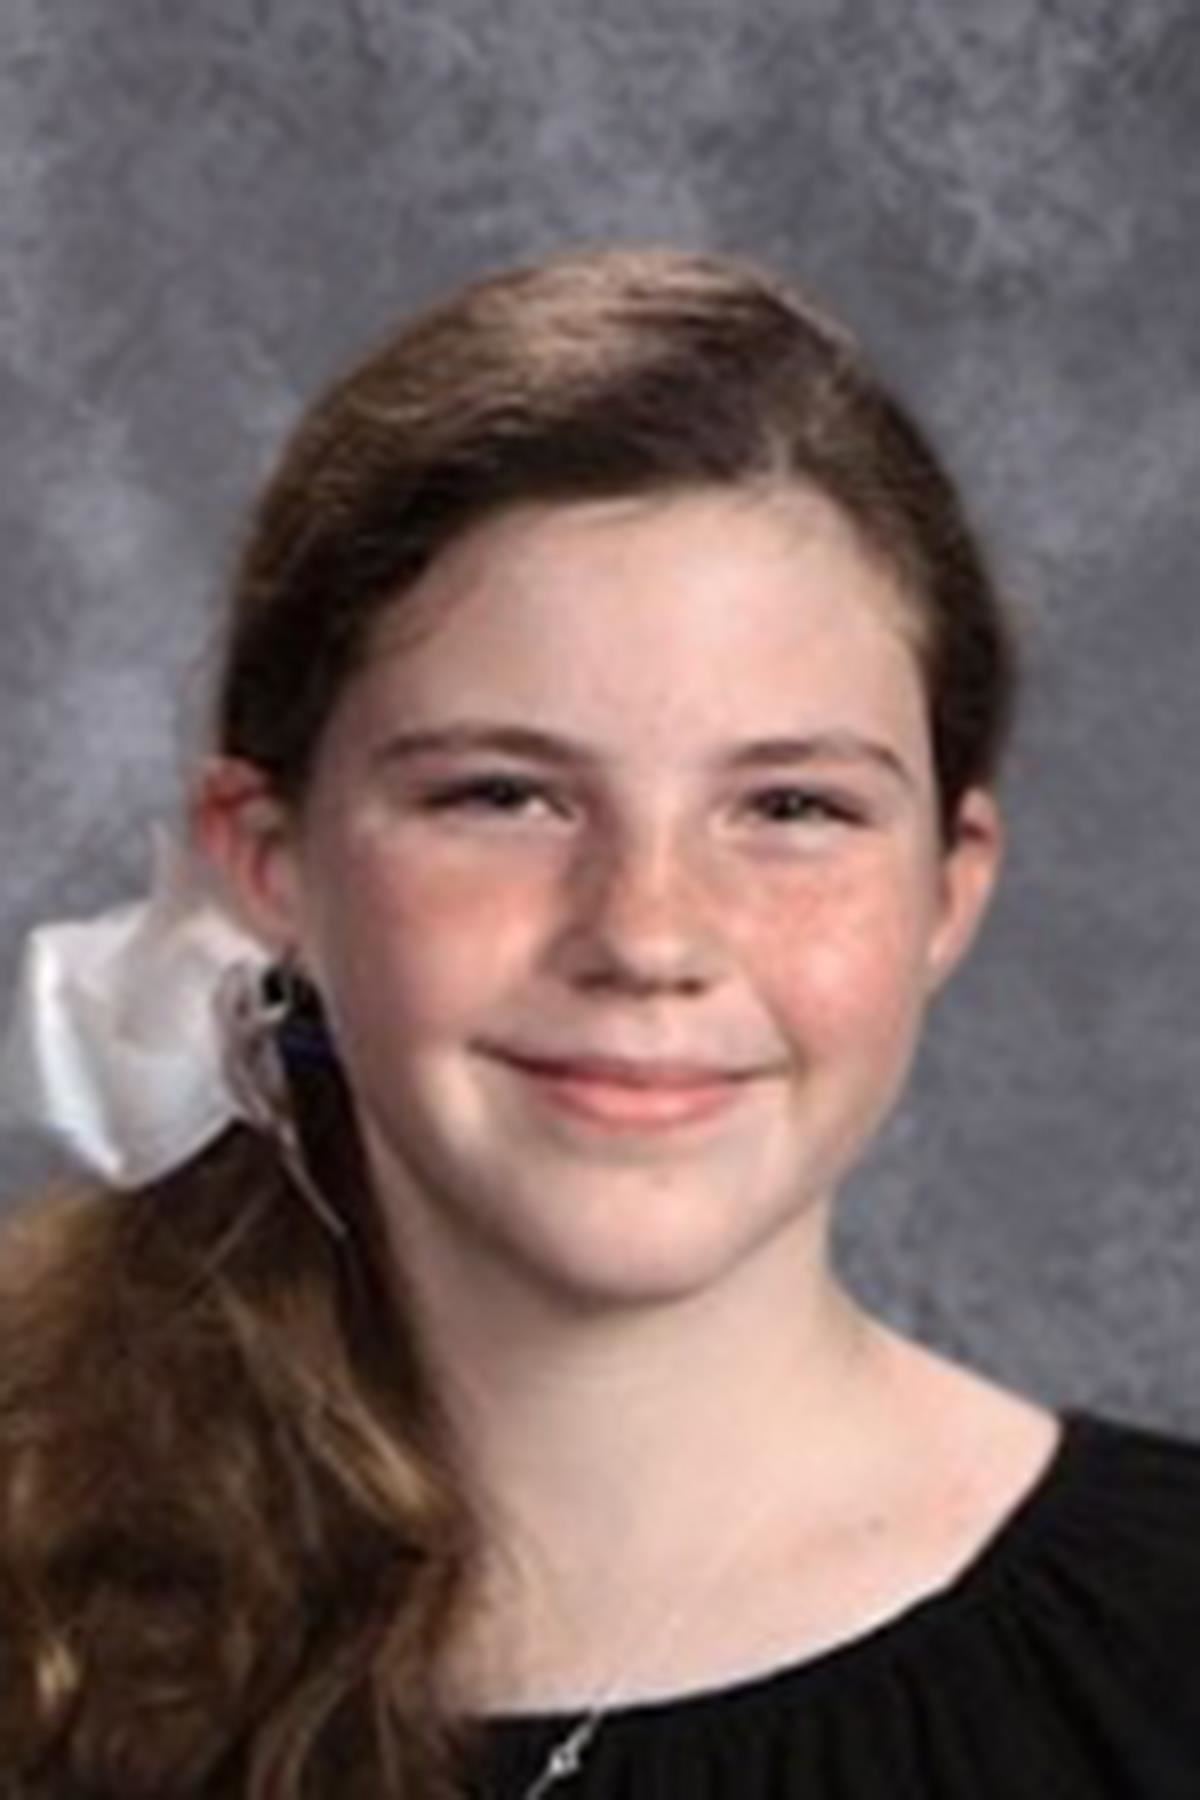 Hamilton Middle School eighth grade student Eloise Spee is an active participant in student council.